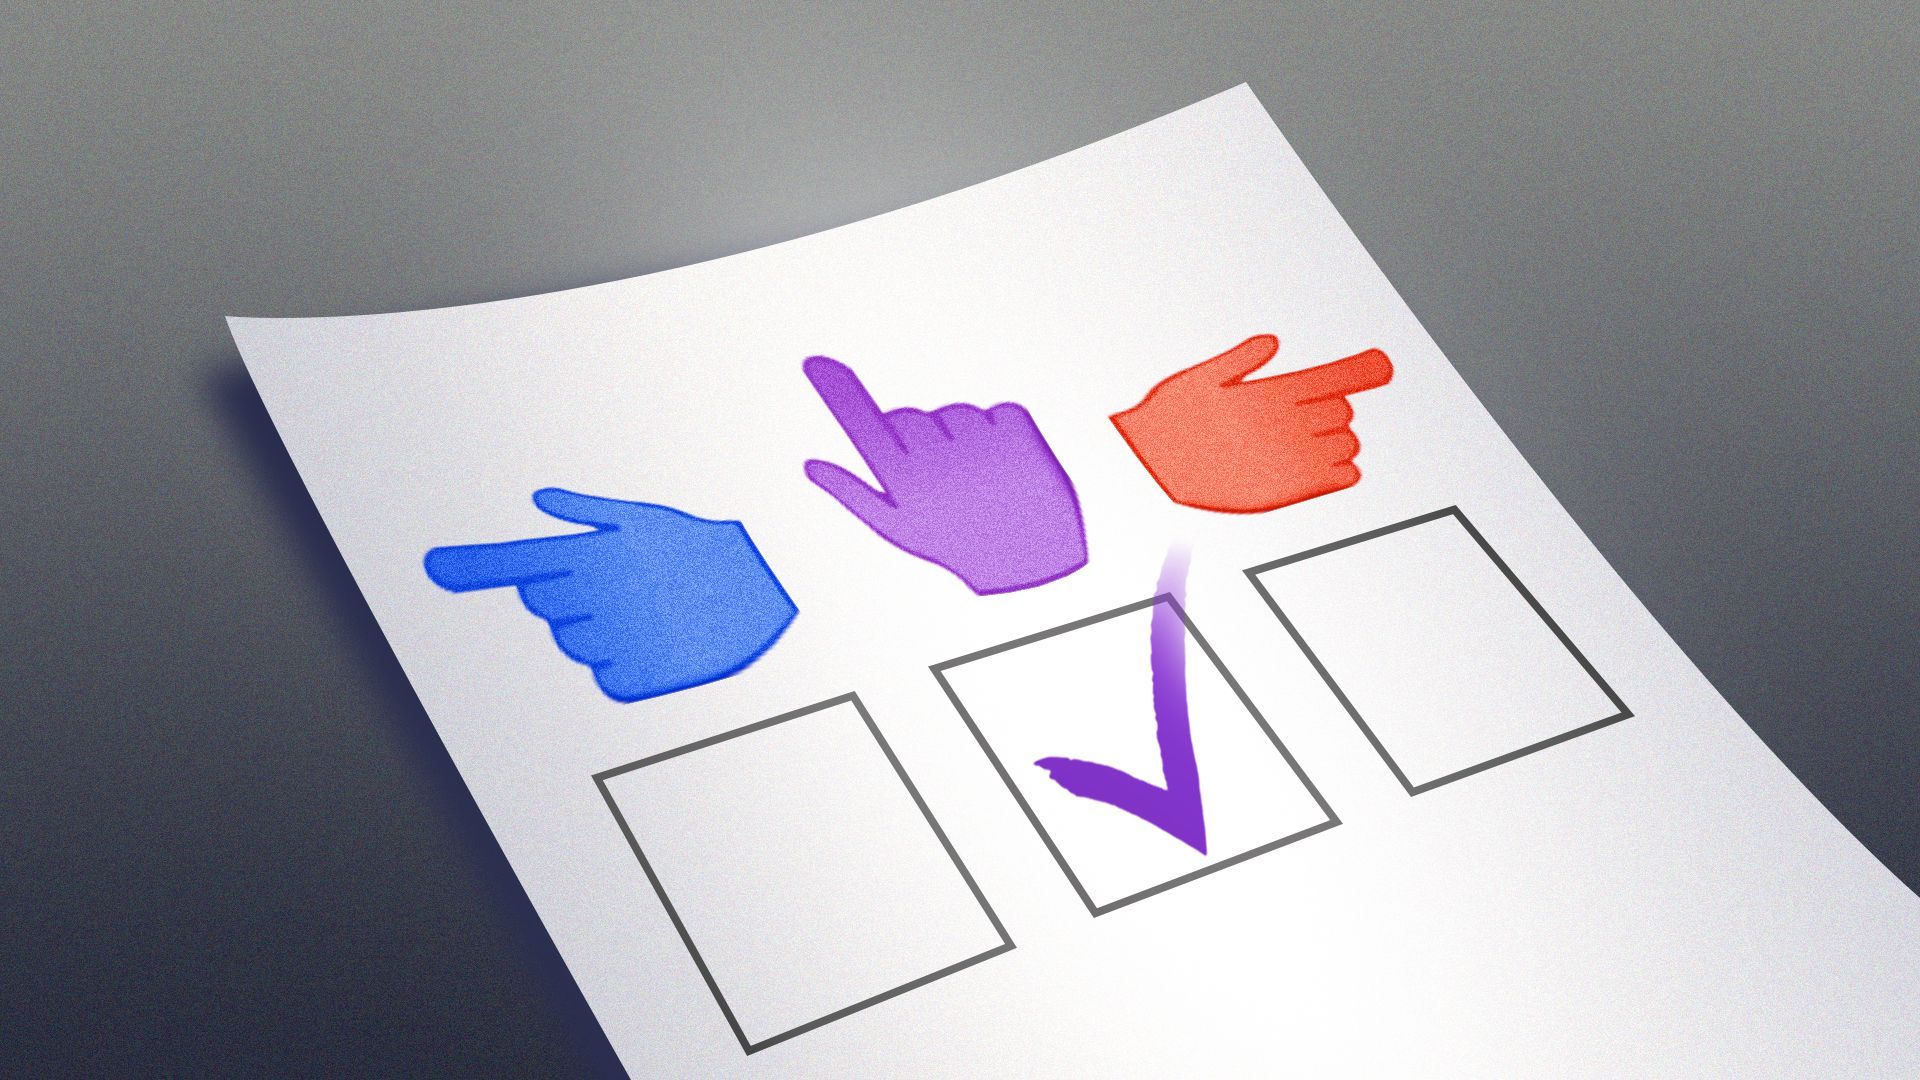 Illustration of a piece of paper with a blue hand pointing left, purple hand pointing up, and red hand pointing right with the purple hand checked off.